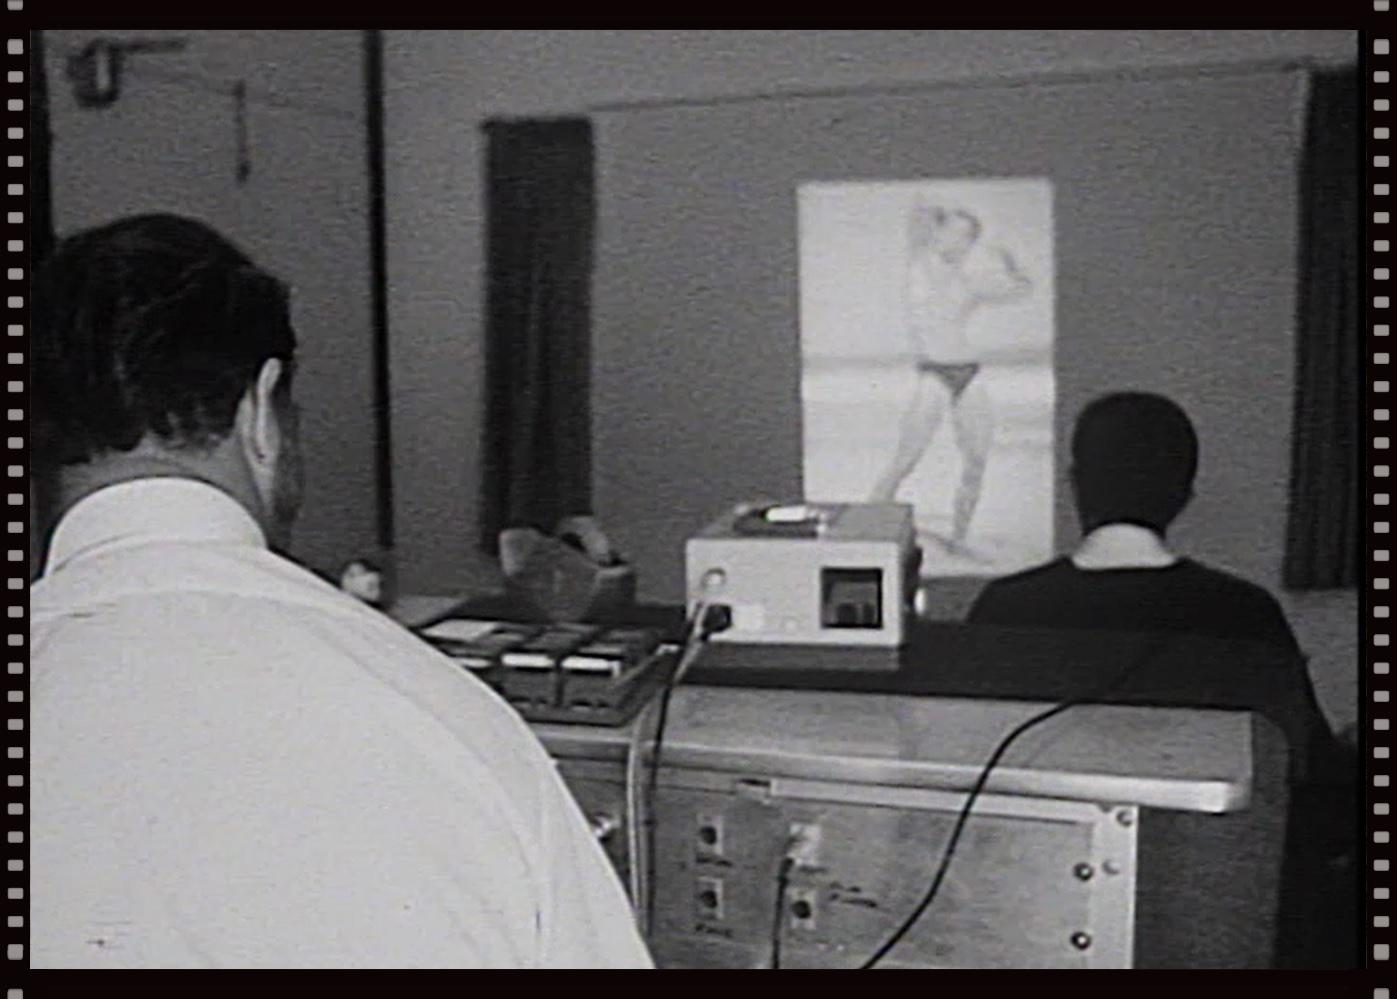 Neil McConaghy Papers, still image from a film reel used to diagnose sexual orientation, Sydney ca. 1964.